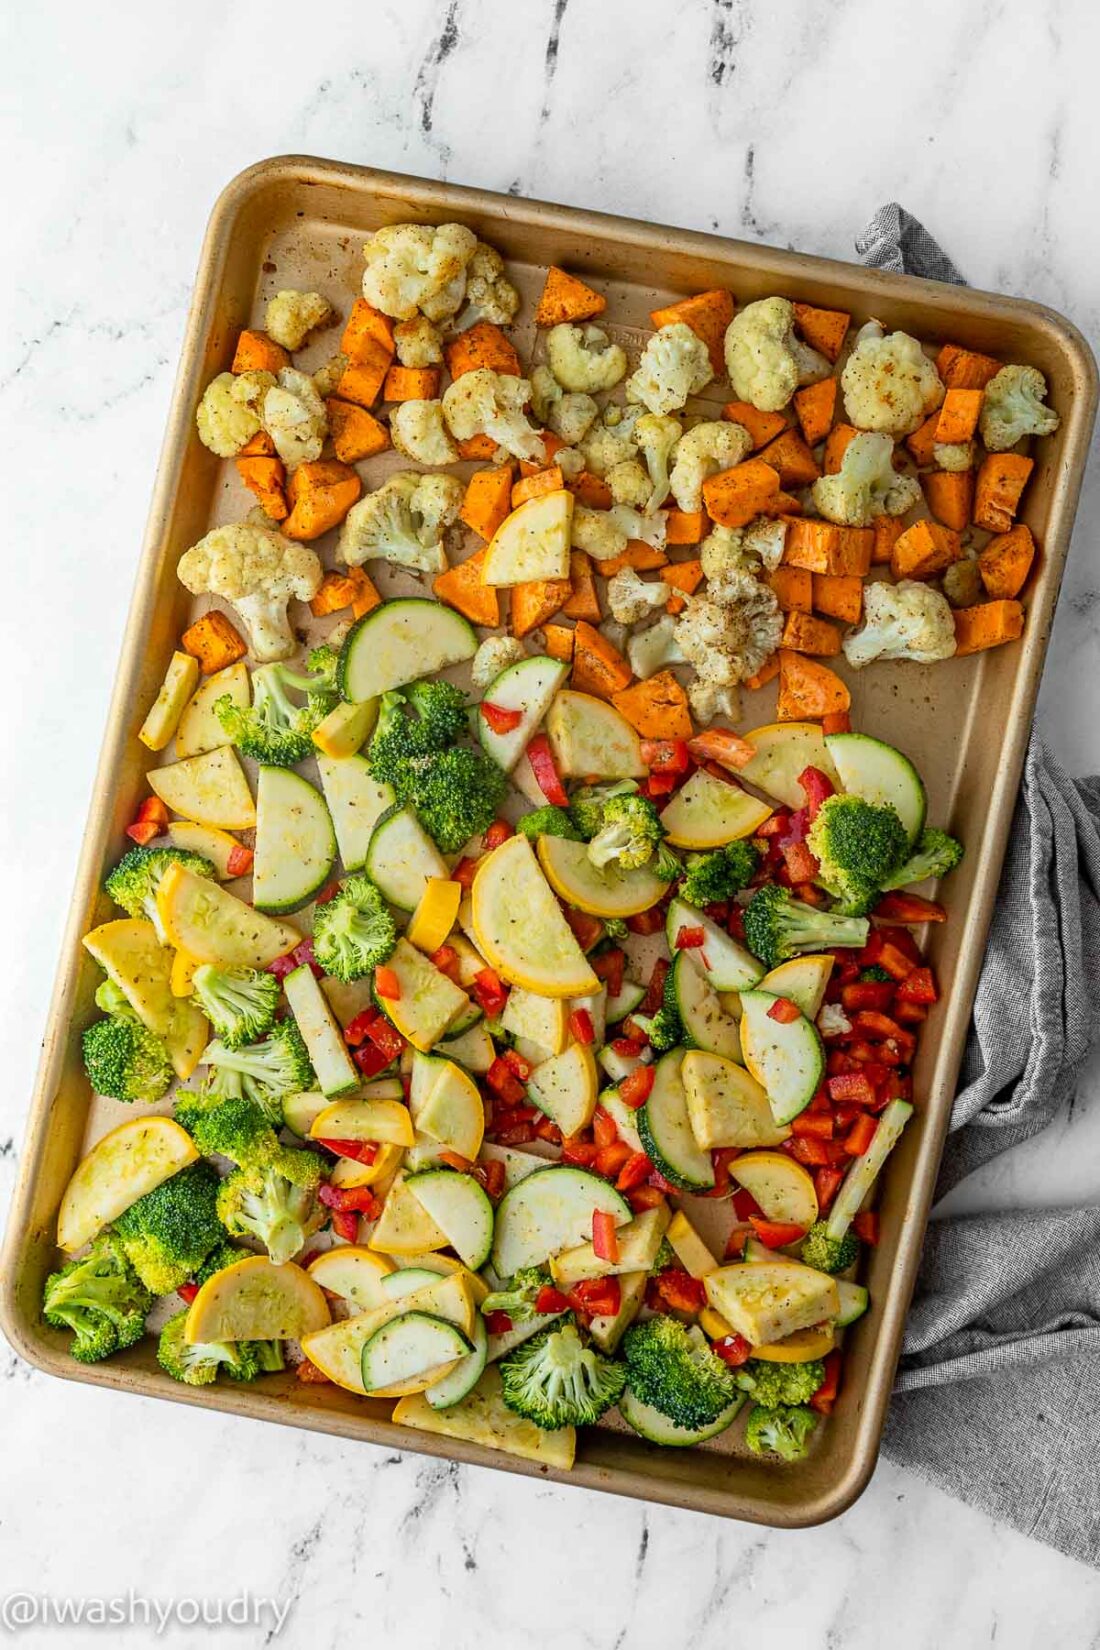 Raw zucchini, squash, peppers and broccoli on a skillet with roasted sweet potatoes and cauliflower. 